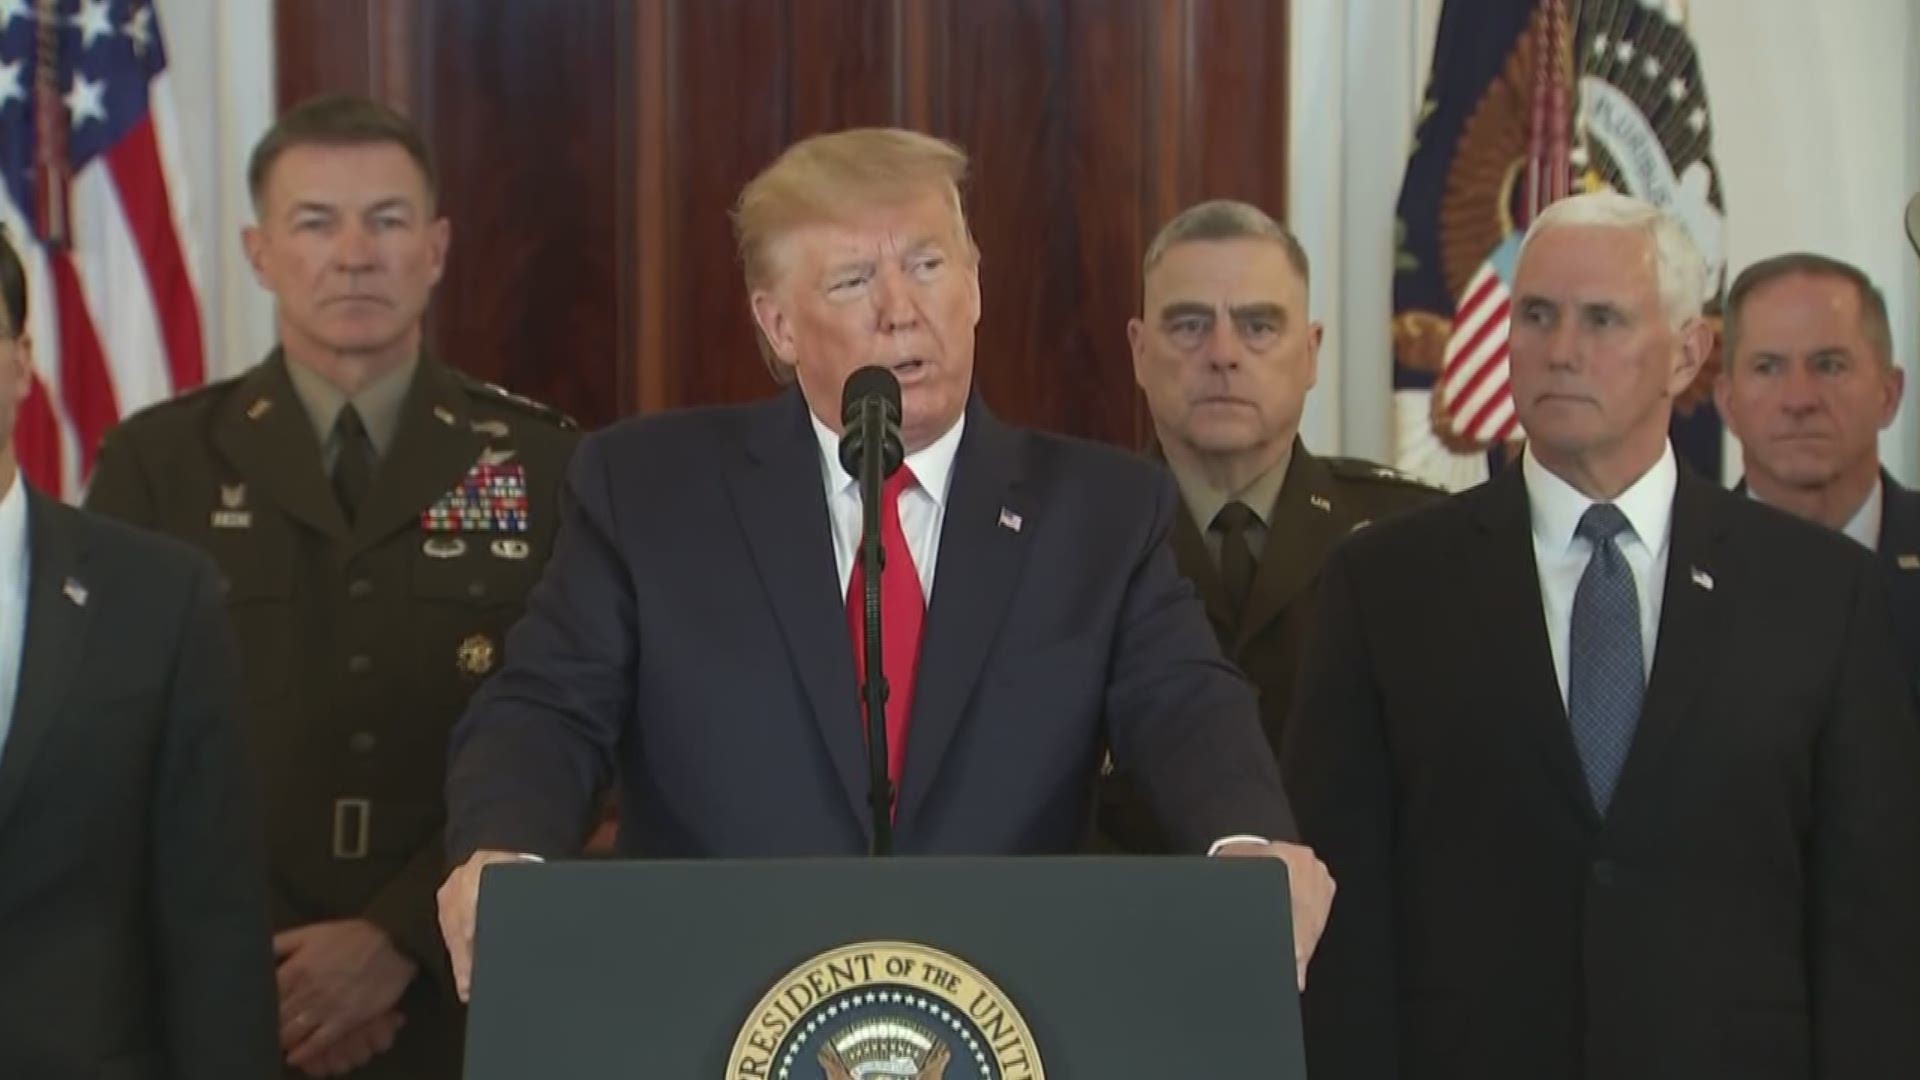 President Donald Trump made a statement Wednesday from the White House on Iran's missile strikes against U.S. military and coalition forces on airbases in Iraq.